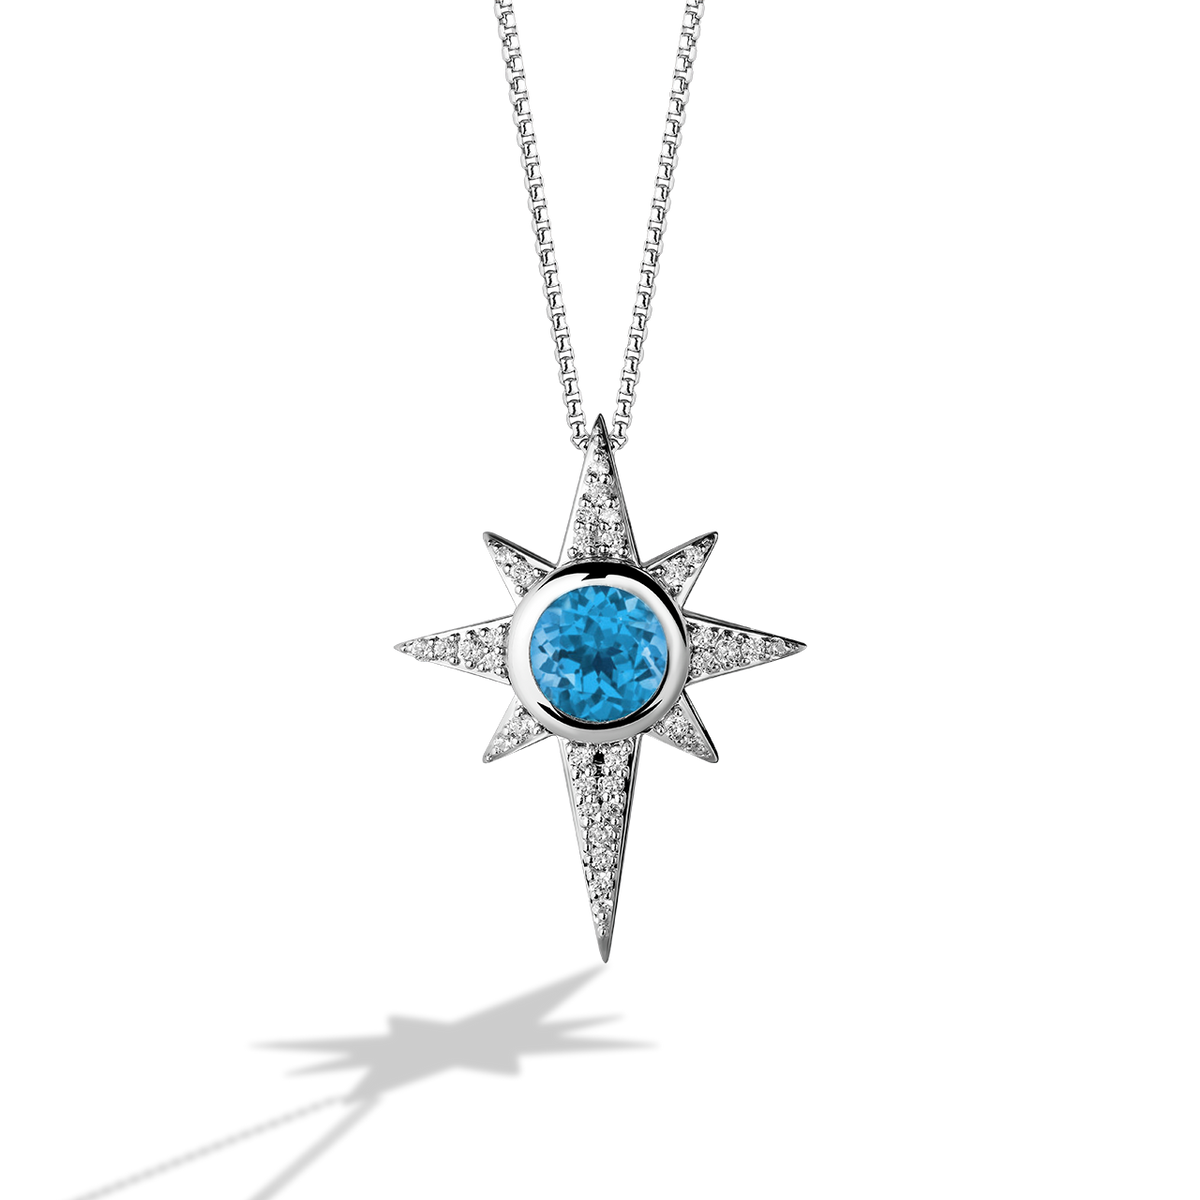 Amazon.com: Kyber Crystal Necklace